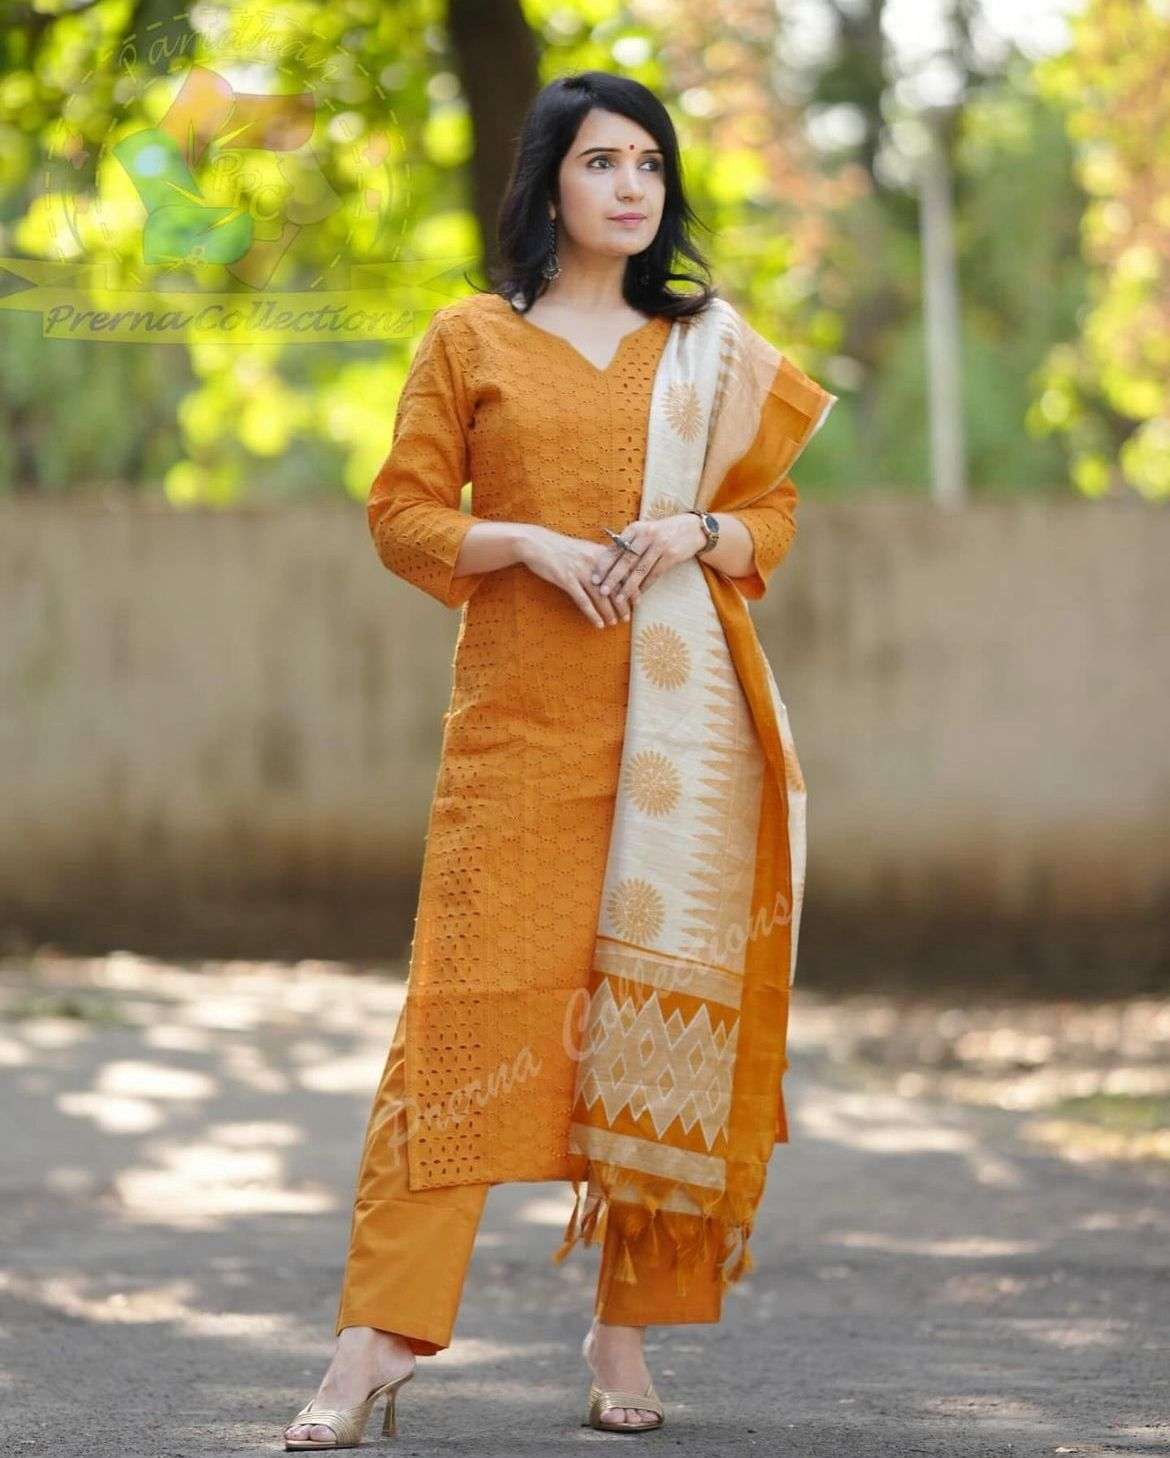 INDEPENDENCE DAY SPECIAL COTTON CLASSIC LOOK READYMADE SUITS...